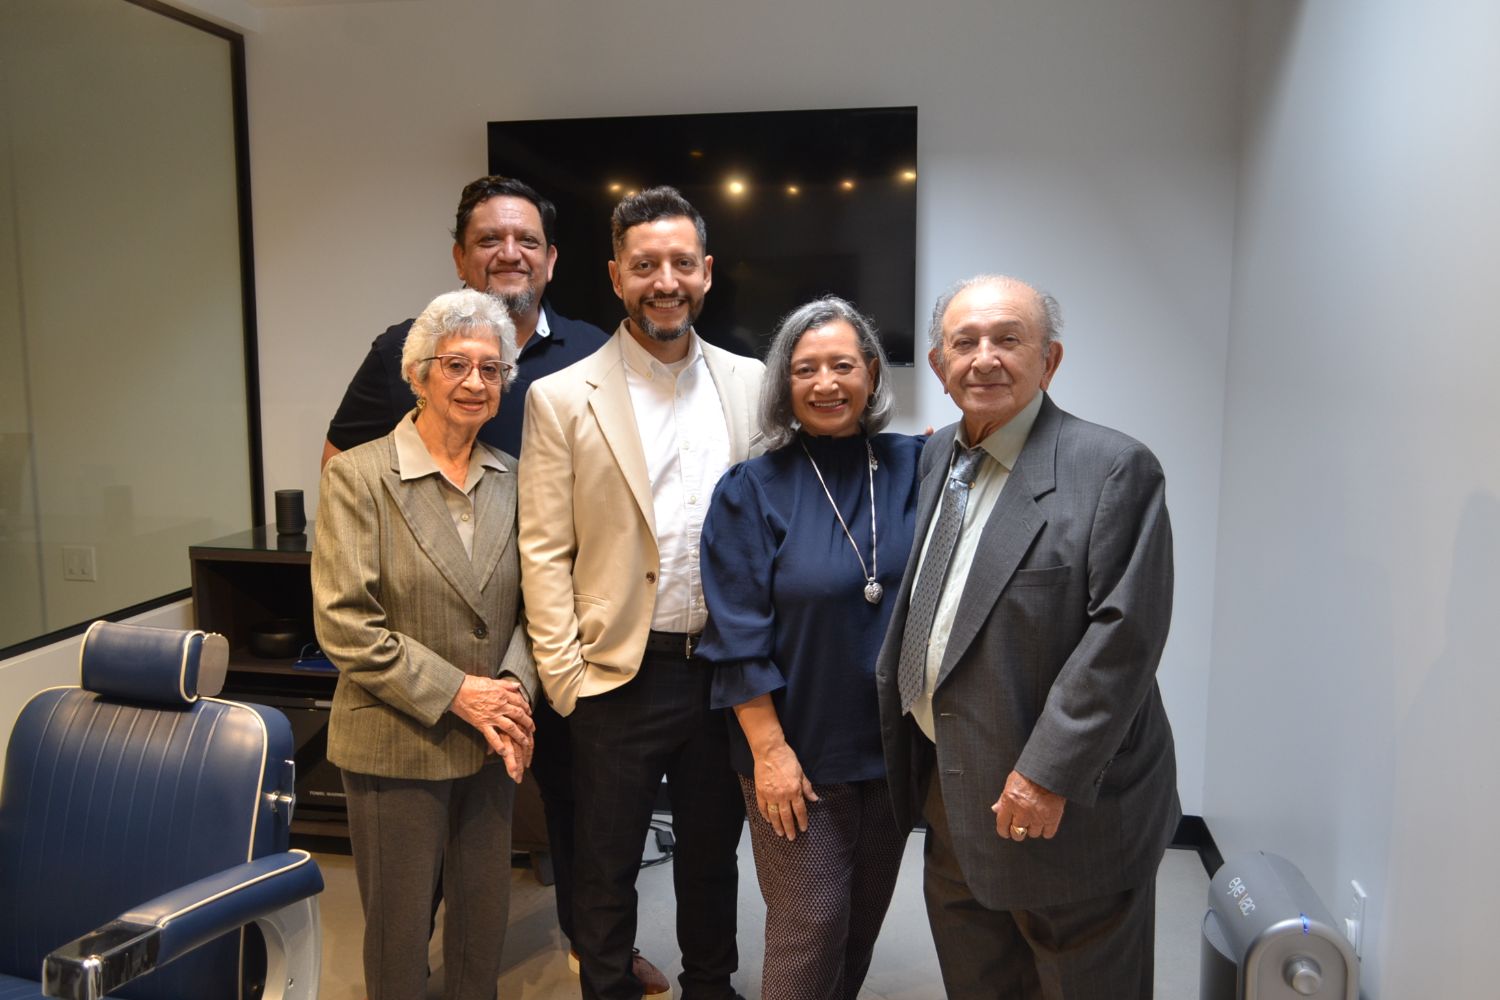 PHOTO: Alisa Hayashida | The South Pasadenan | Calibrate co-owner, Jason Lopez, with his family L-R: grandmother Cecilia, brother, Steven, mother, Luz Marina and grandfather, Carlos.